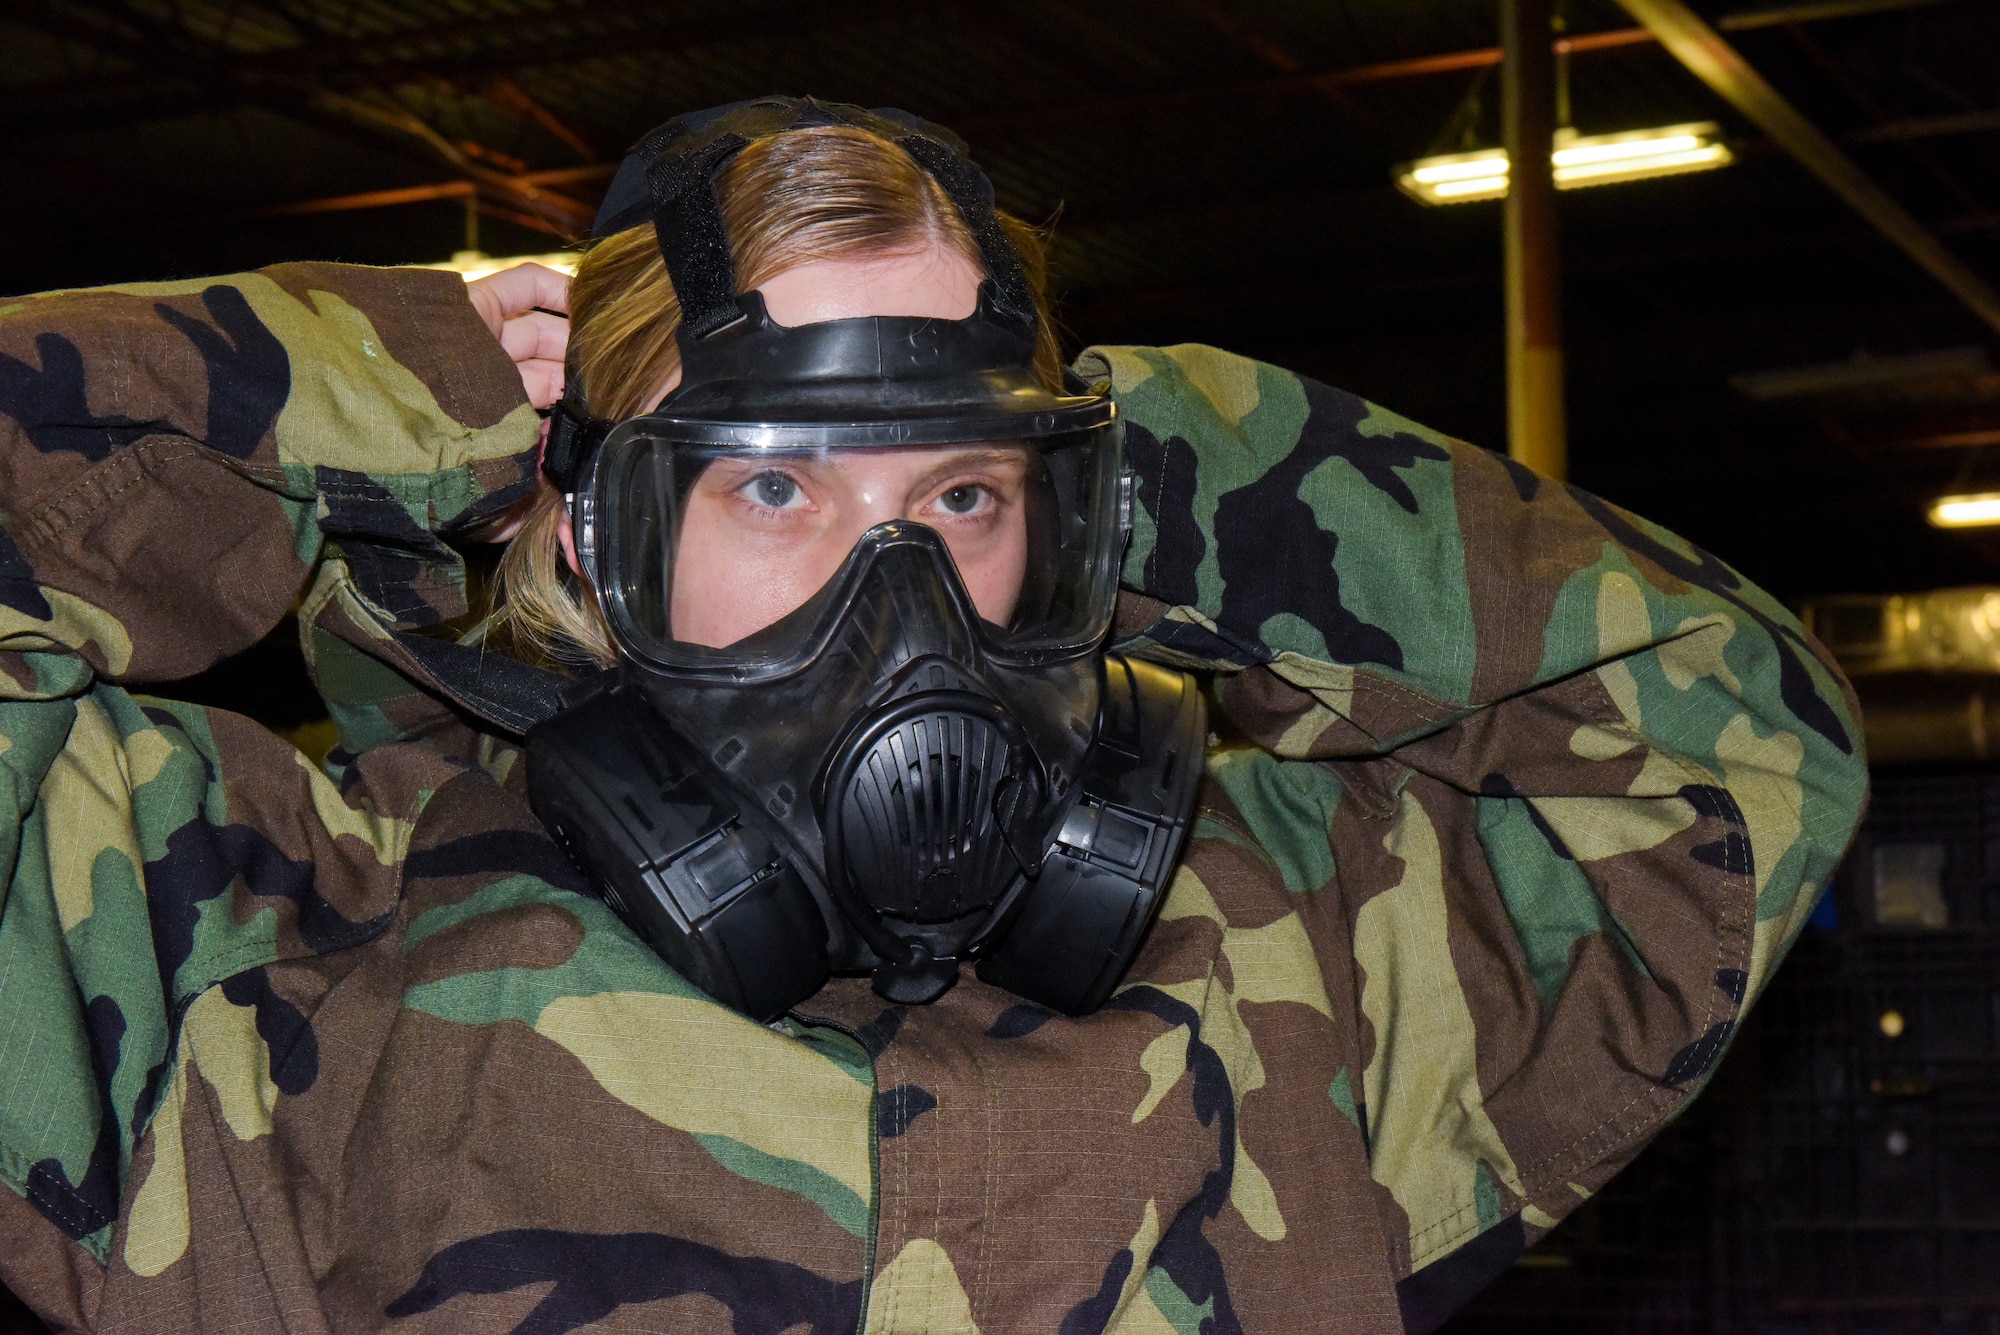 U.S. Air Force Senior Airman Paige Carver, a 6th Logistics Readiness Squadron Individual Protective Equipment (IPE) technician, tries on mission oriented protective posture gear at MacDill Air Force Base, Florida, Jan. 18, 2022.